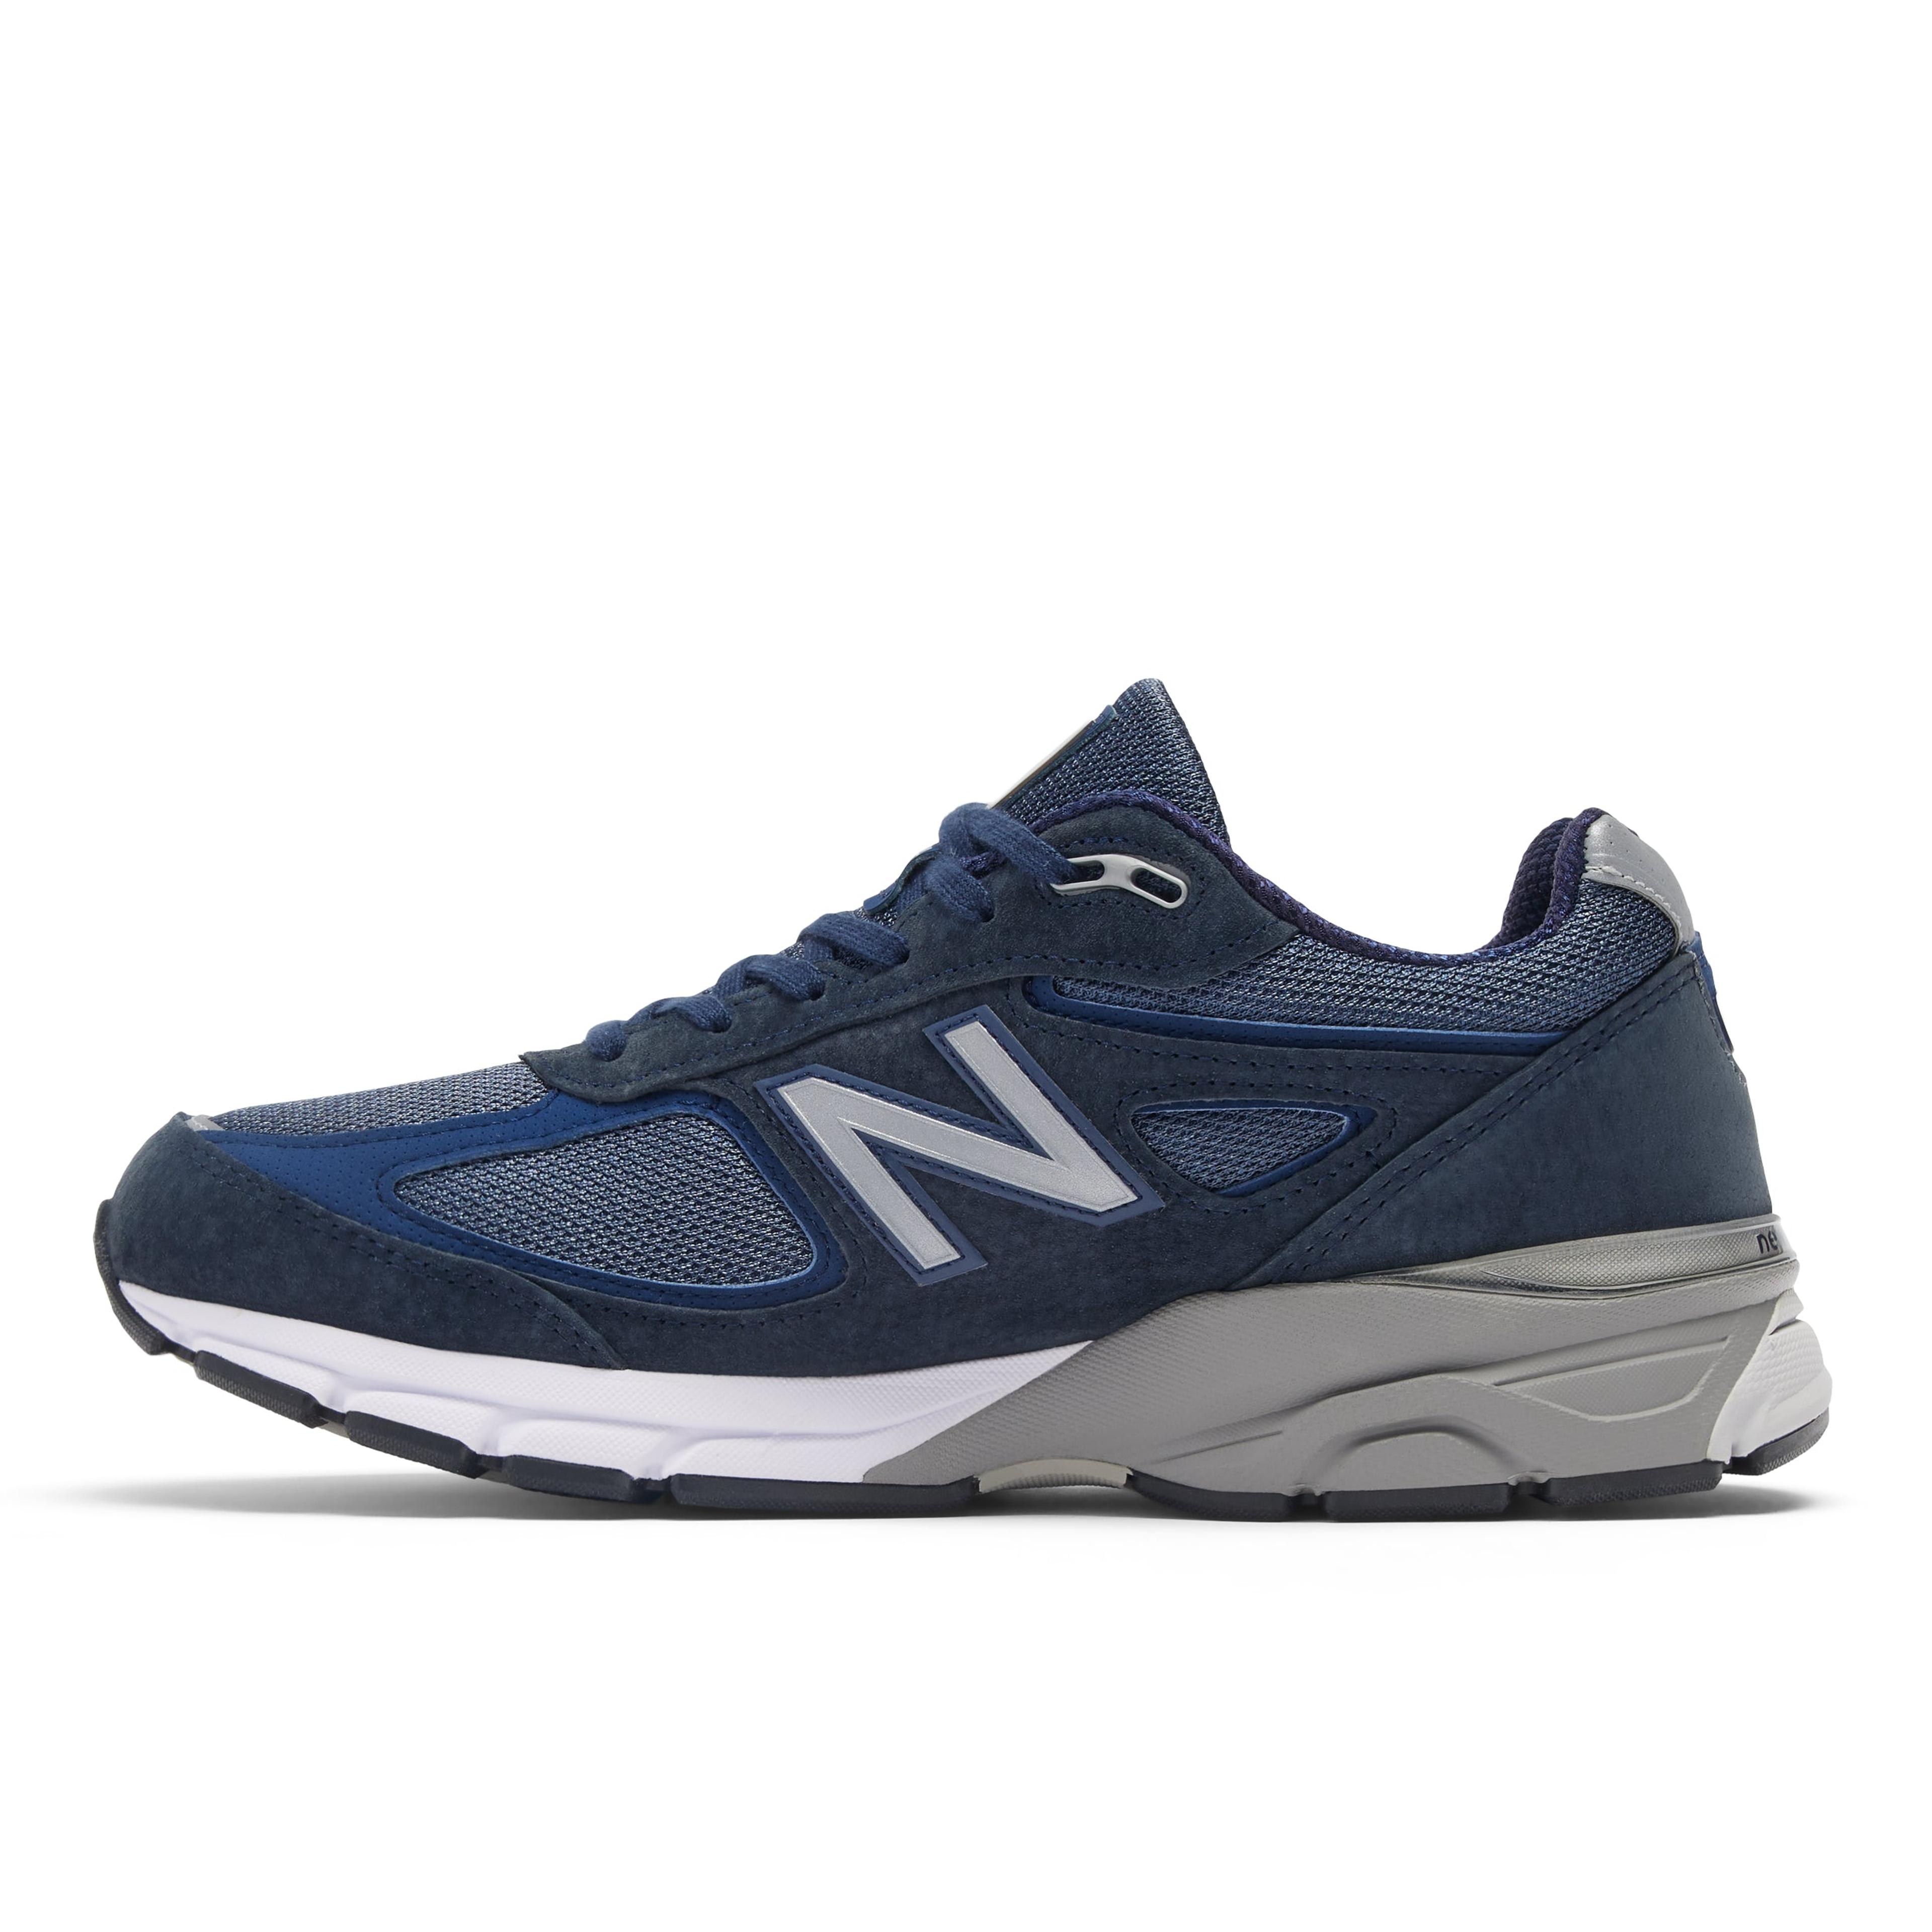 Alternate View 4 of New Balance 990v4 "Made in USA" Navy